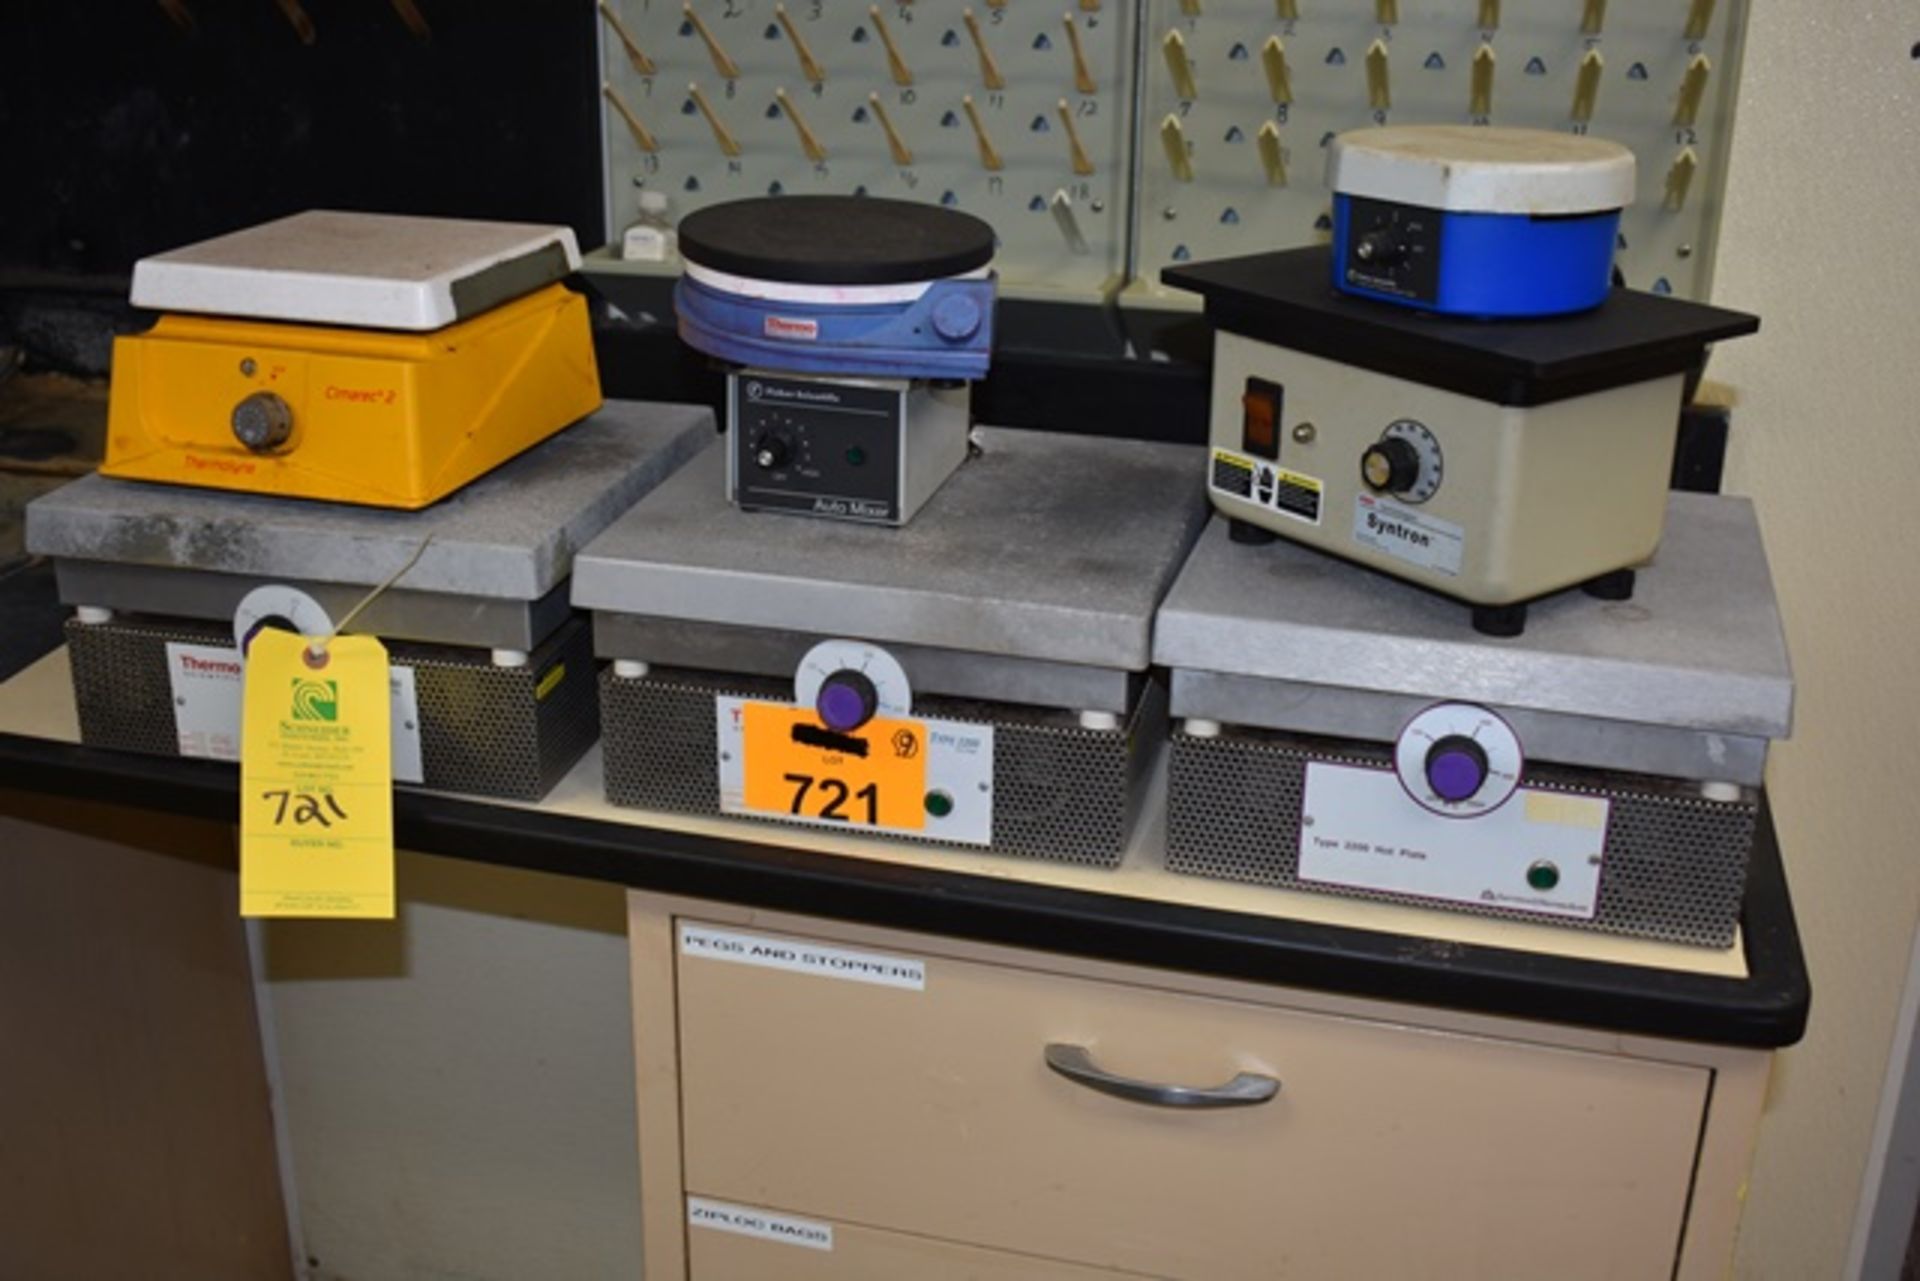 [Lot] (8) Hot plates and magnetic stirrers, (3) Thermo 2200 hot plates, (5) magnetic stirrers